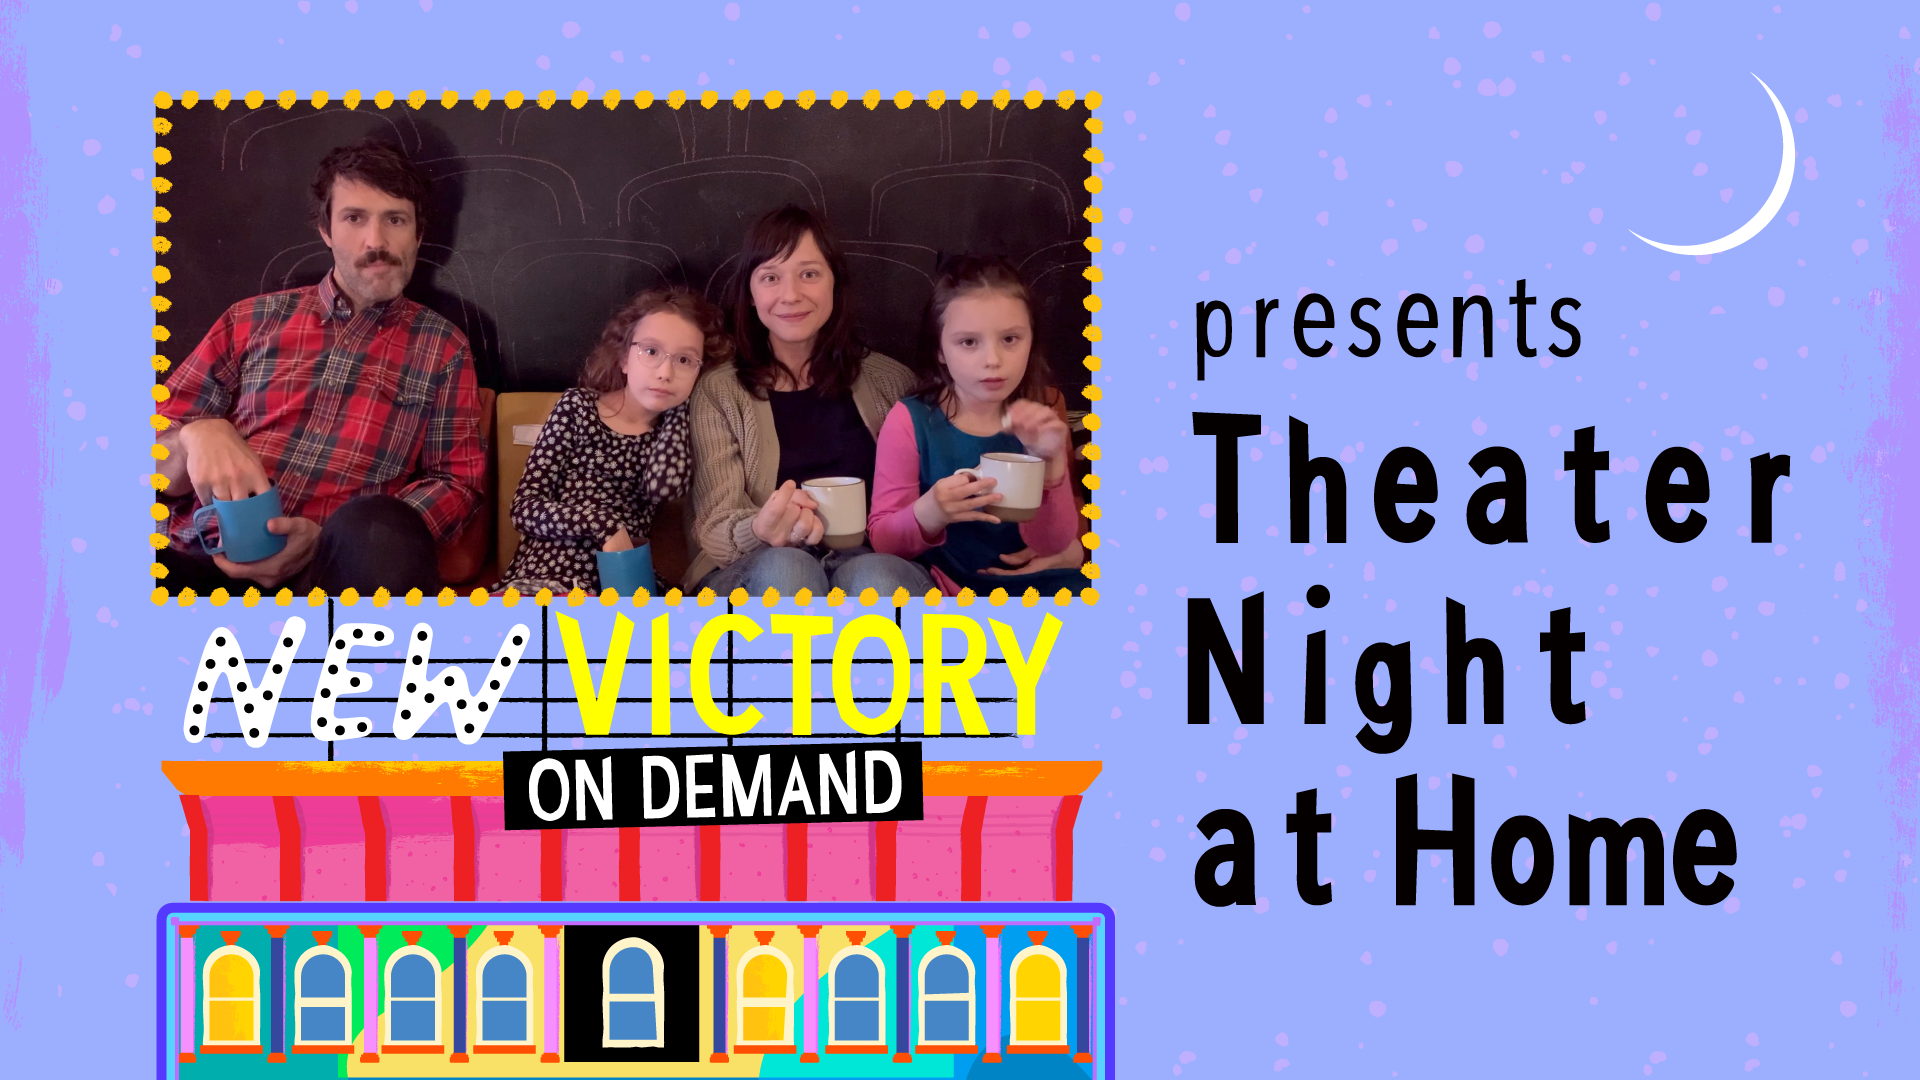 A colorful illustration of the New Victory Theater with a sign on top that says New Victory On Demand, with an image of Teaching Artist Lauren Sharpe and her family within a billboard and the words presents Theater Night at Home to the right.